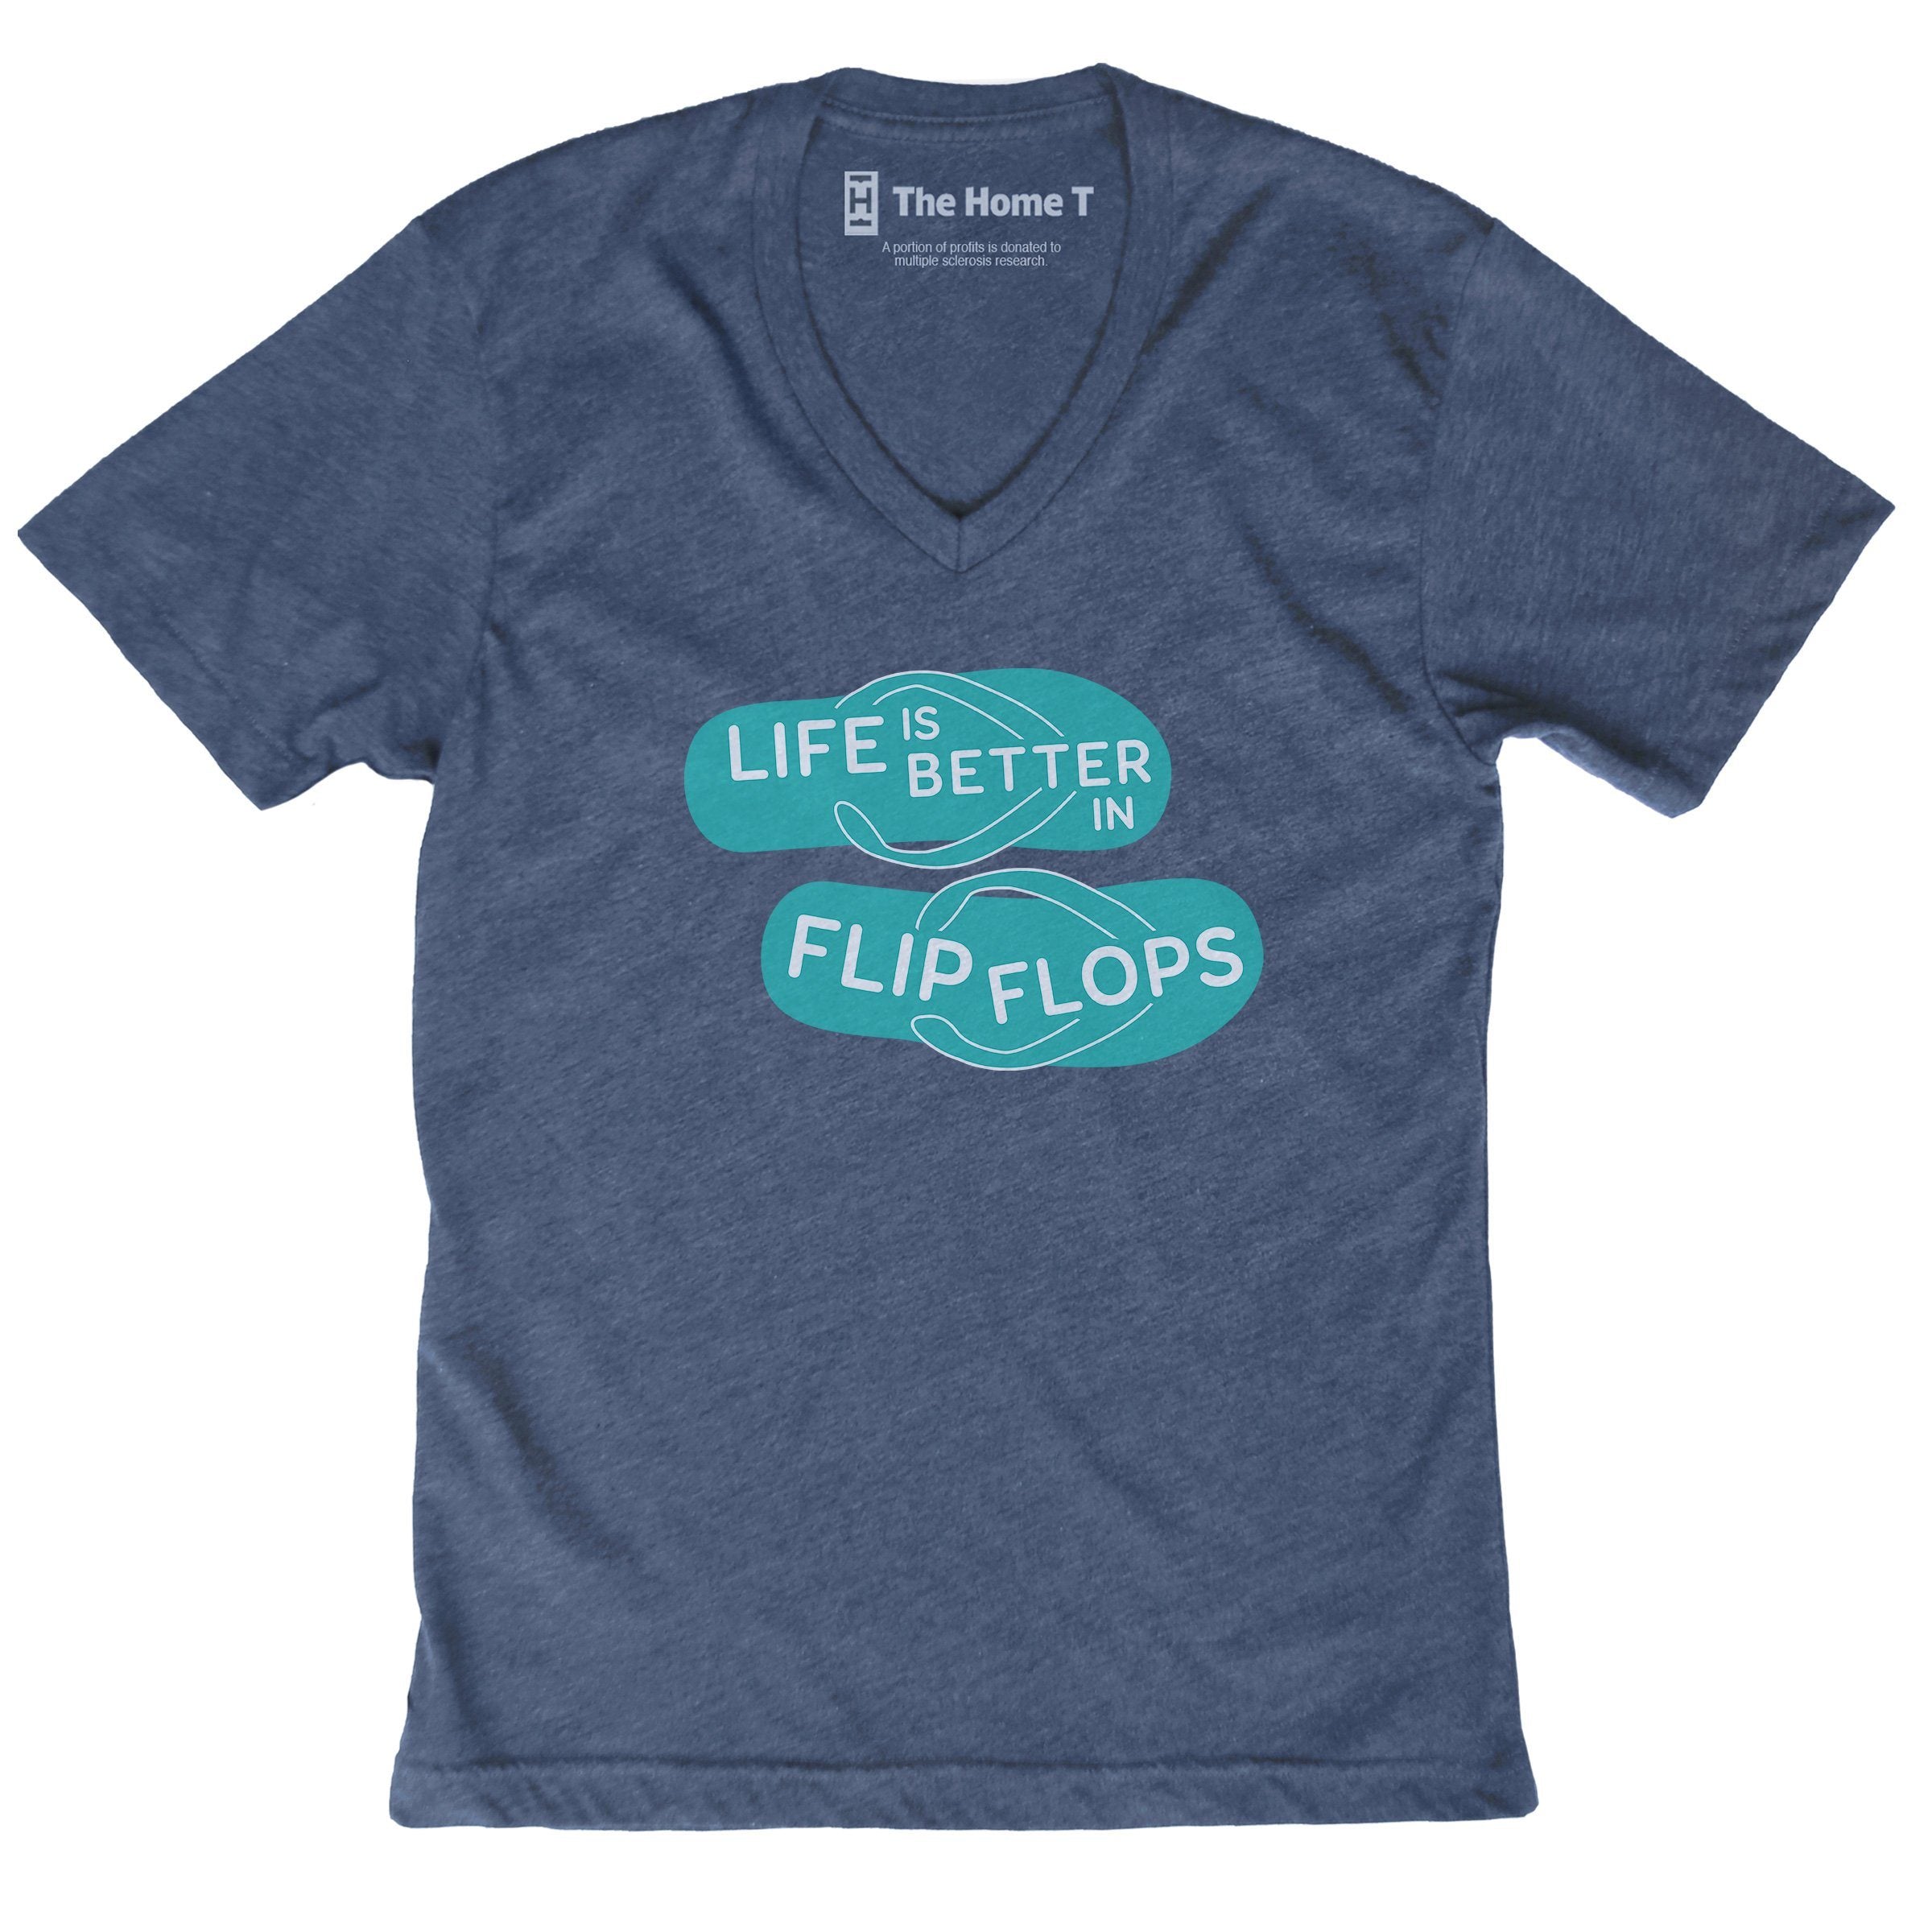 Life Is Better In Flip Flops Crew neck The Home T XS V-Neck